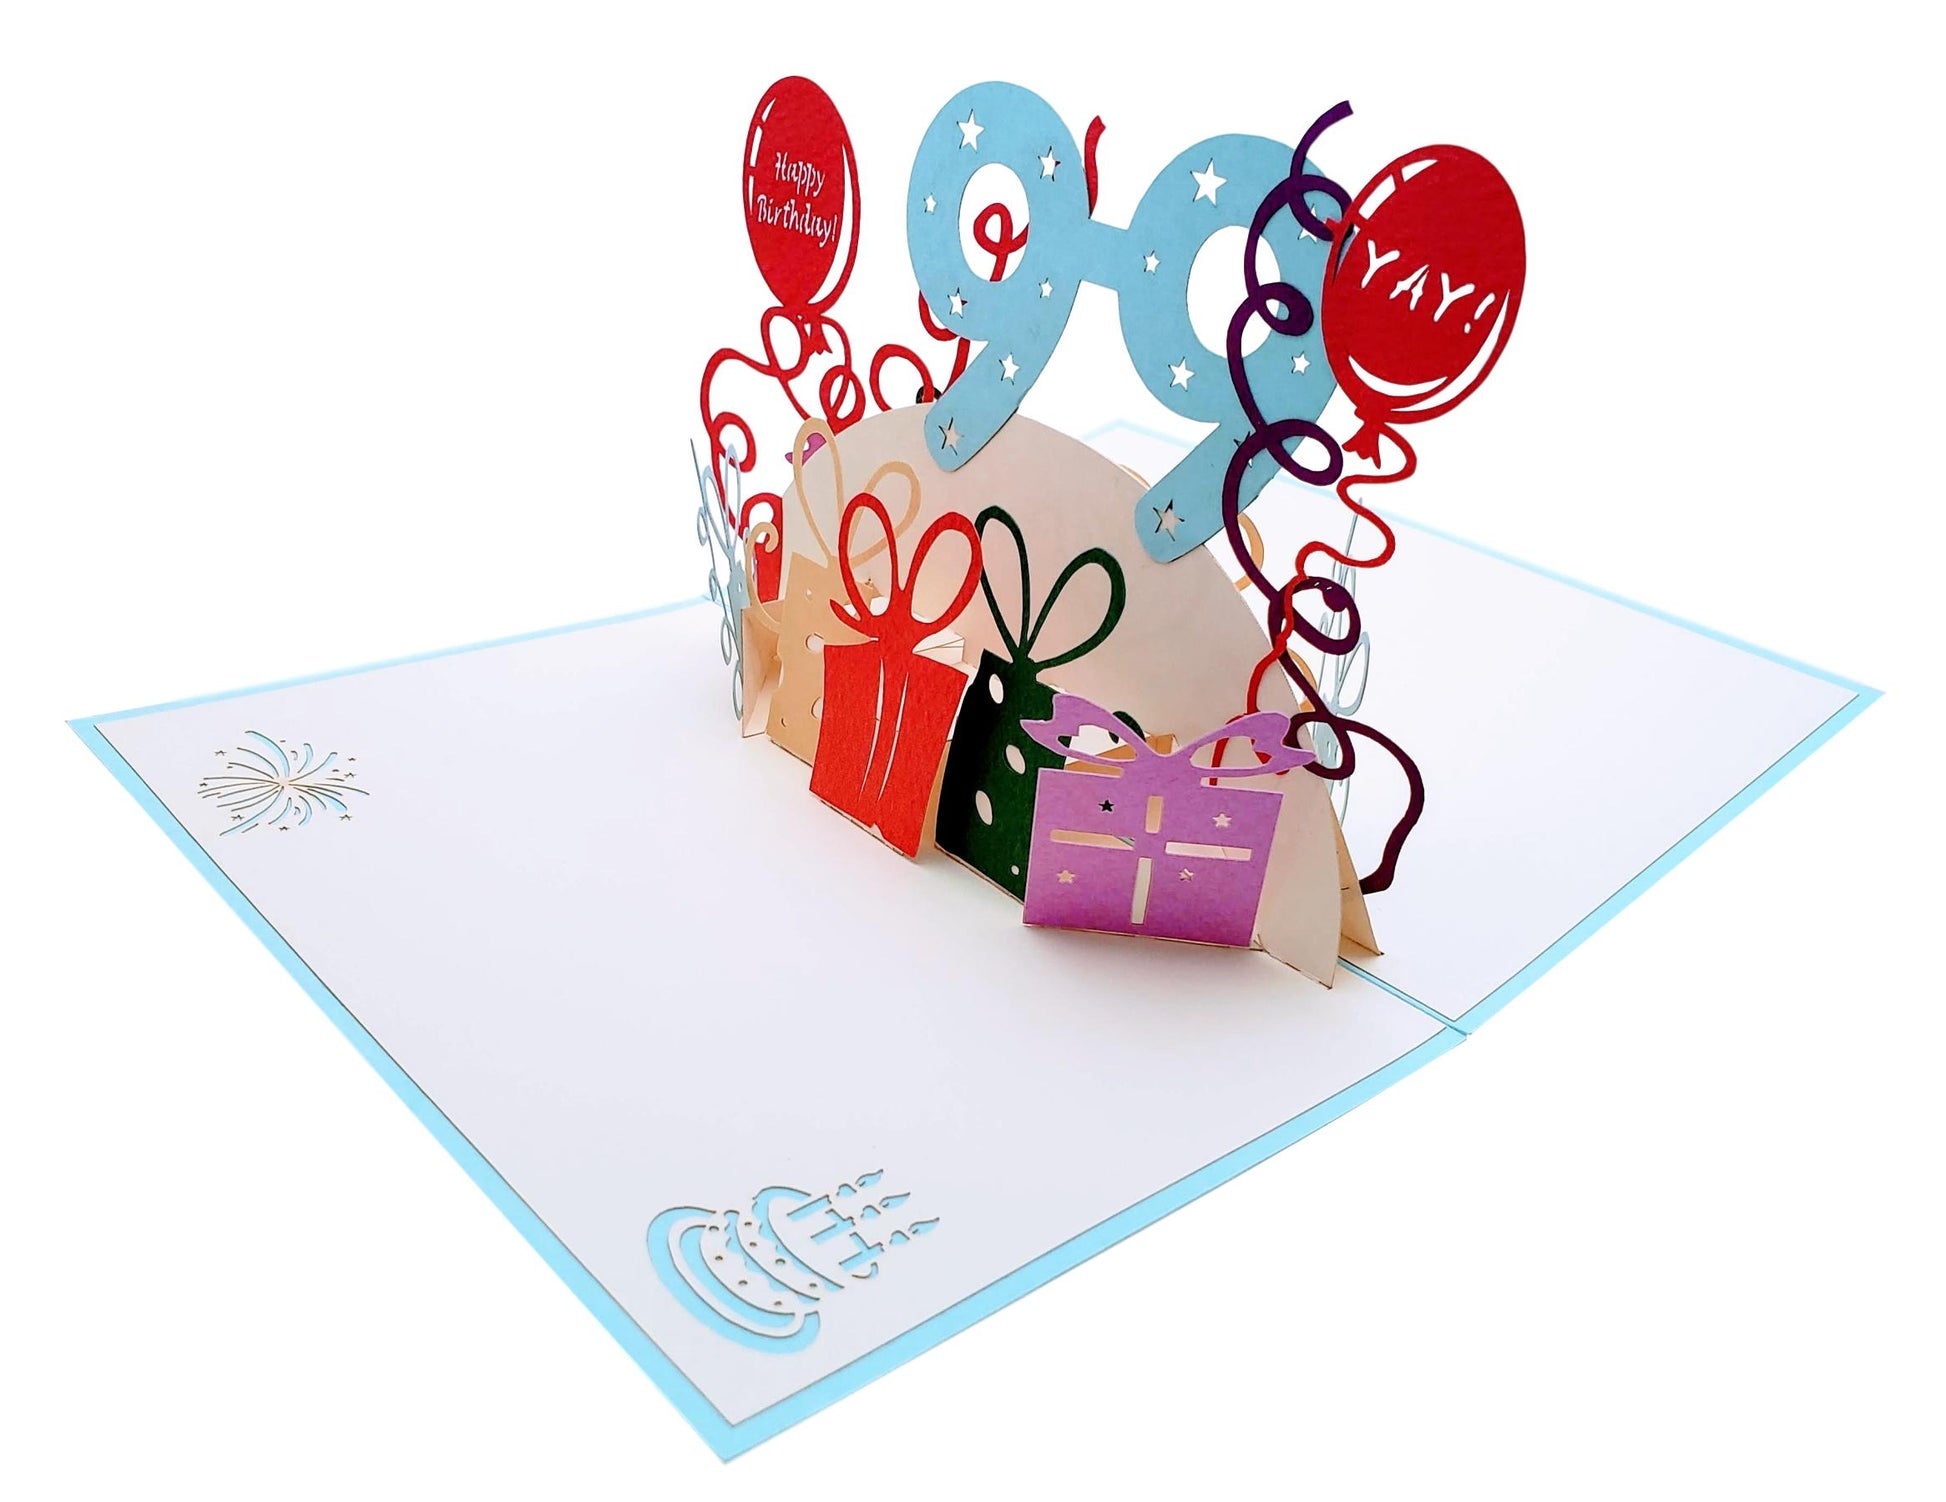 Happy 99th Birthday With Lots of Presents 3D Pop Up Greeting Card - Age - best deal - Birthday - iGifts And Cards